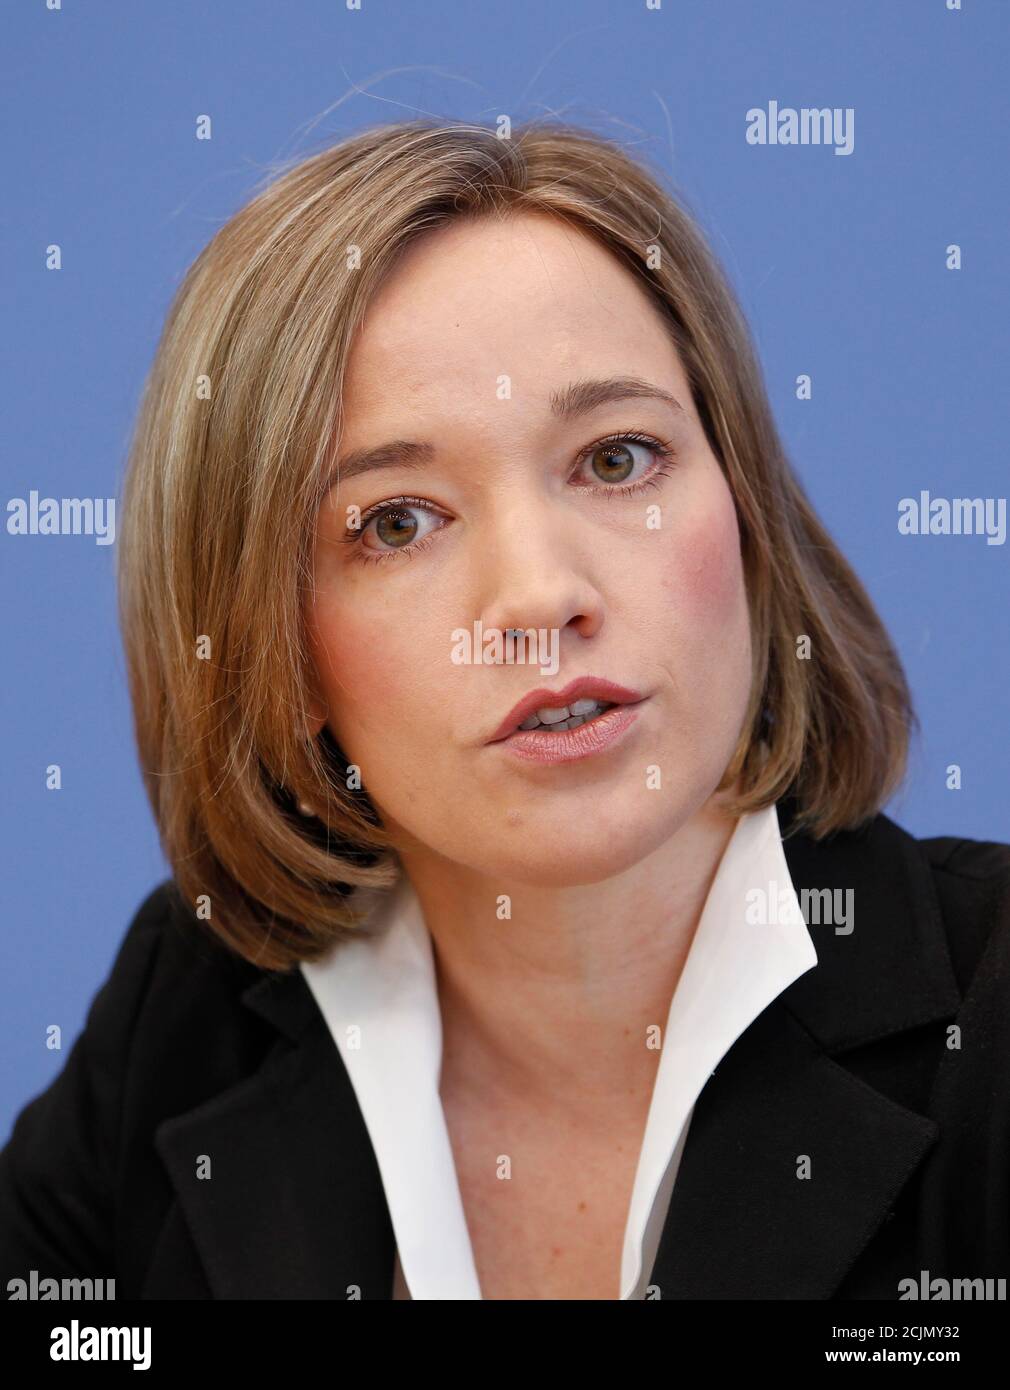 German Family Minister Kristina Schroeder presents findings of the Monitor Familienleben 2011 report during a news conference at the Bundespressekonferenz (Federal Press Conference) in Berlin, September 14, 2011.  REUTERS/Thomas Peter  (GERMANY - Tags: POLITICS HEADSHOT) Stock Photo